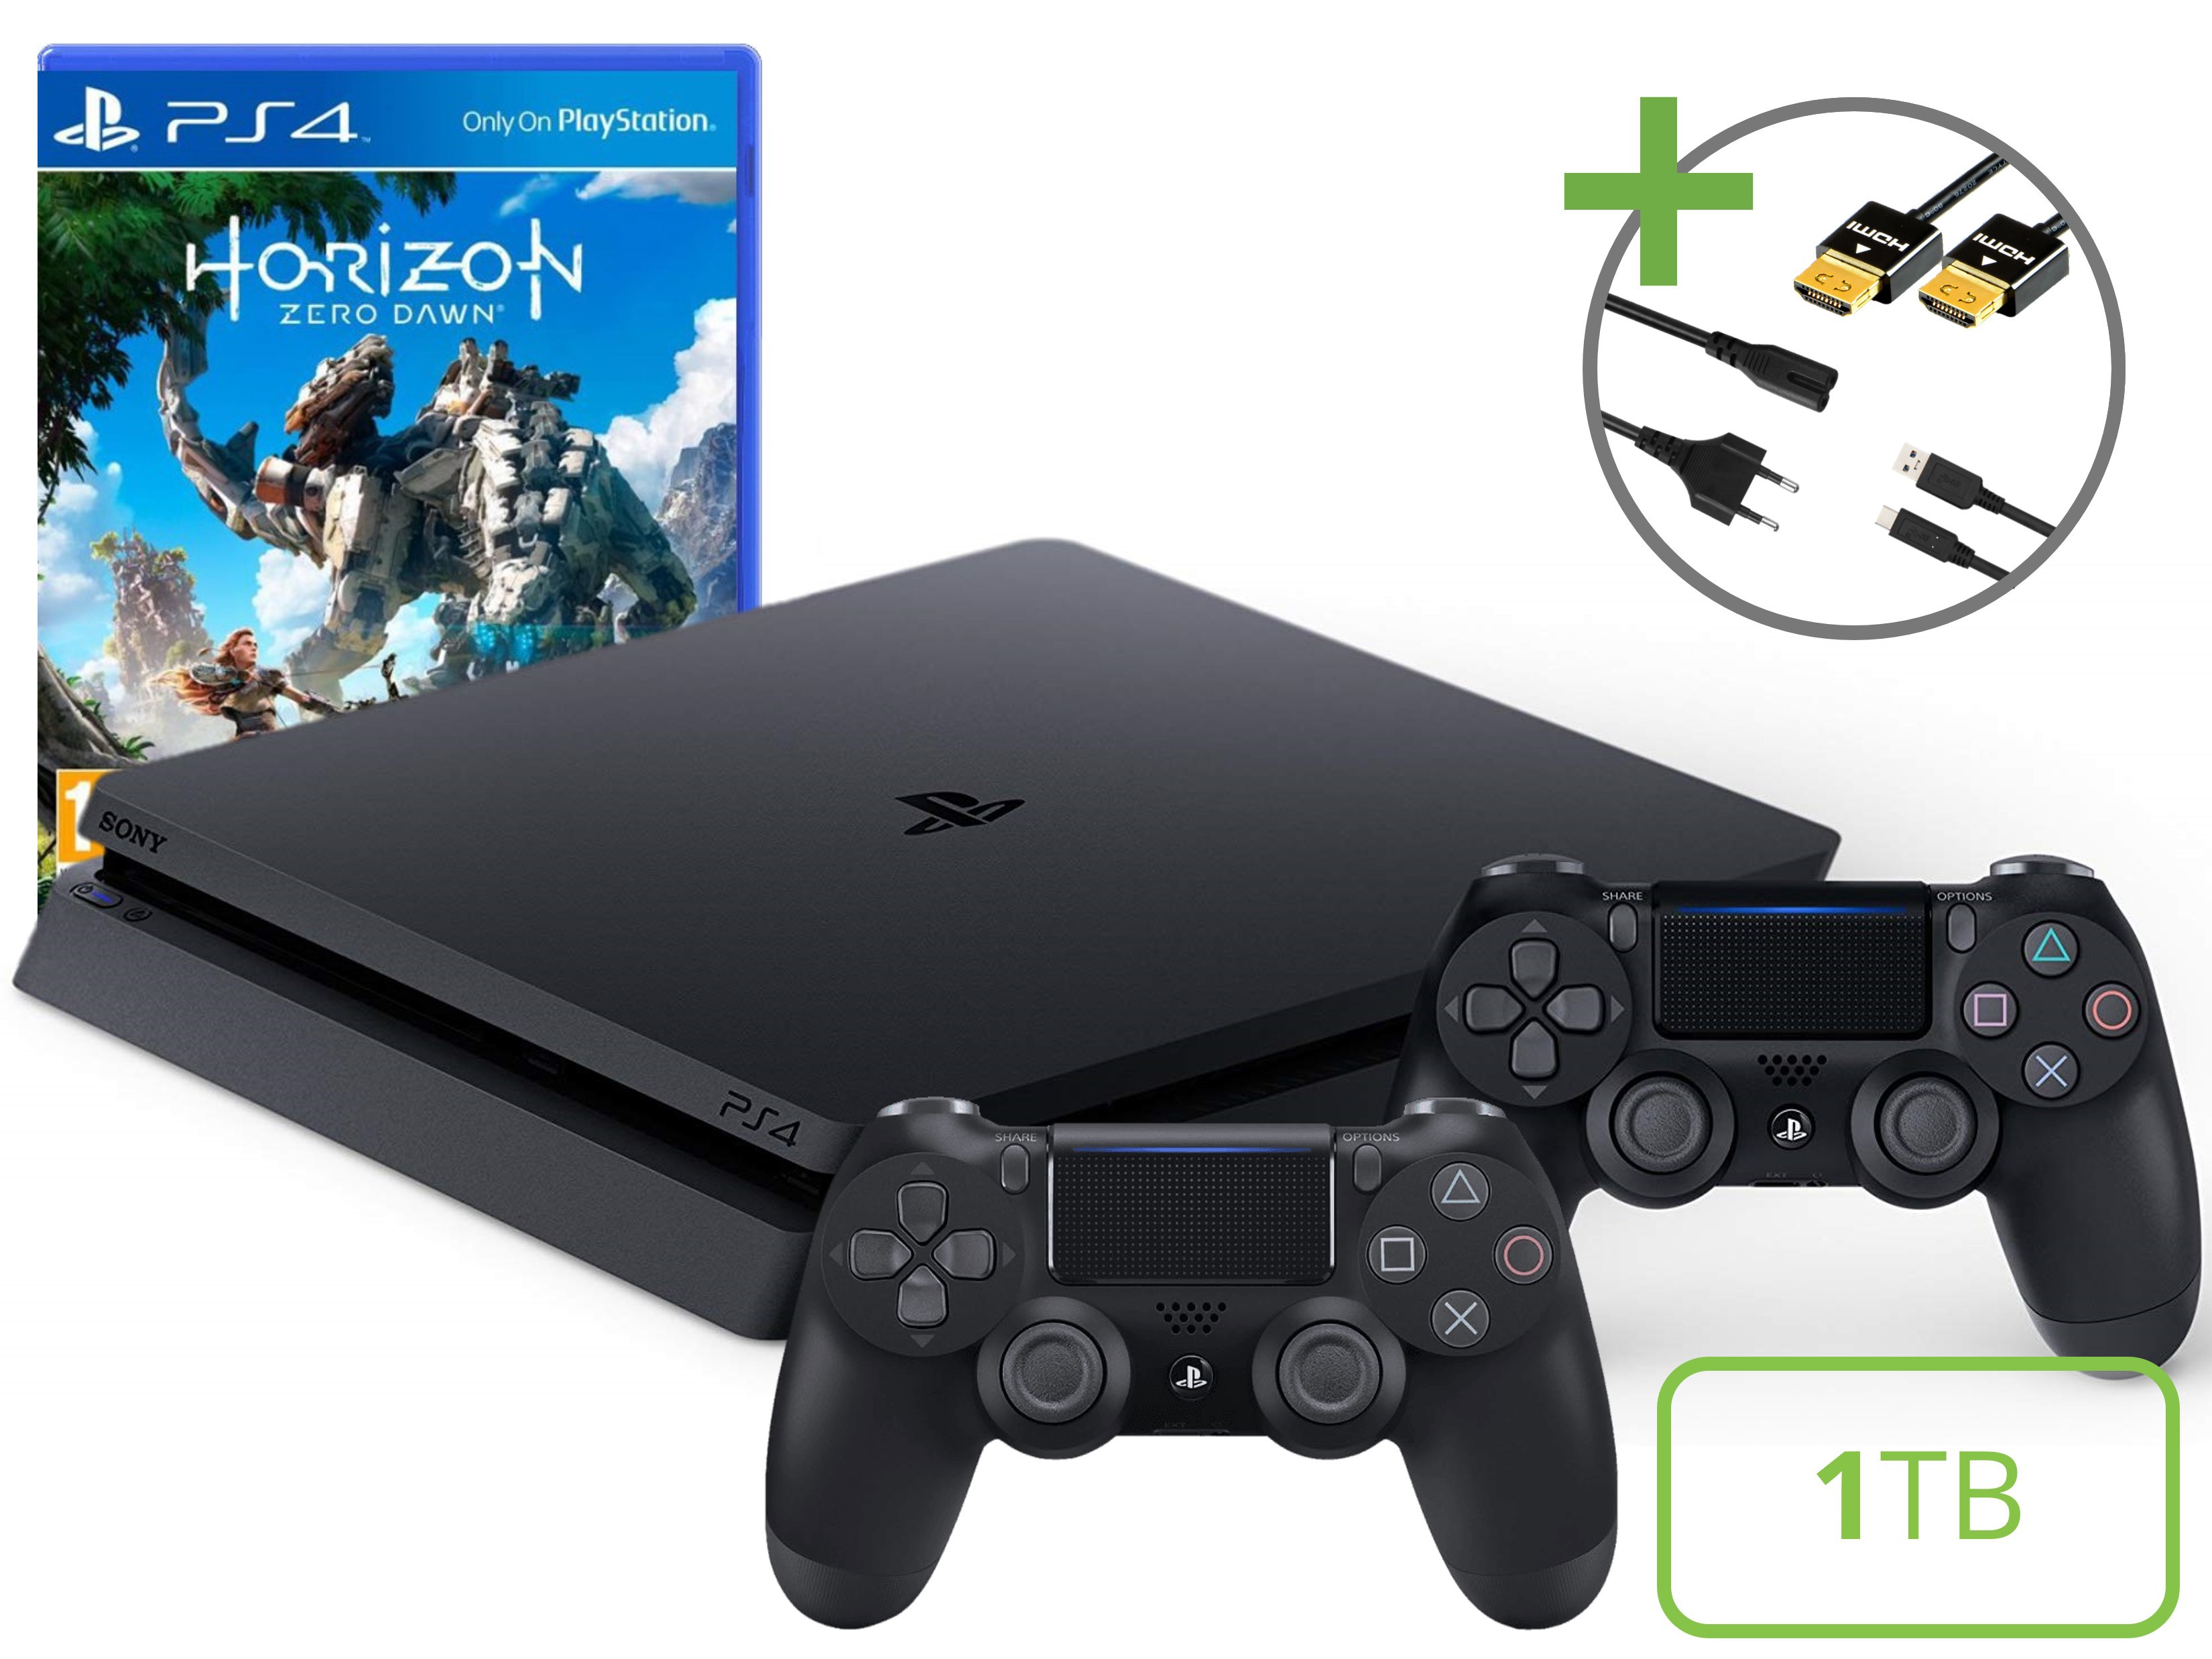 Sony PlayStation 4 Slim Starter Pack - 1TB Two Player Horizon Edition - Playstation 4 Hardware